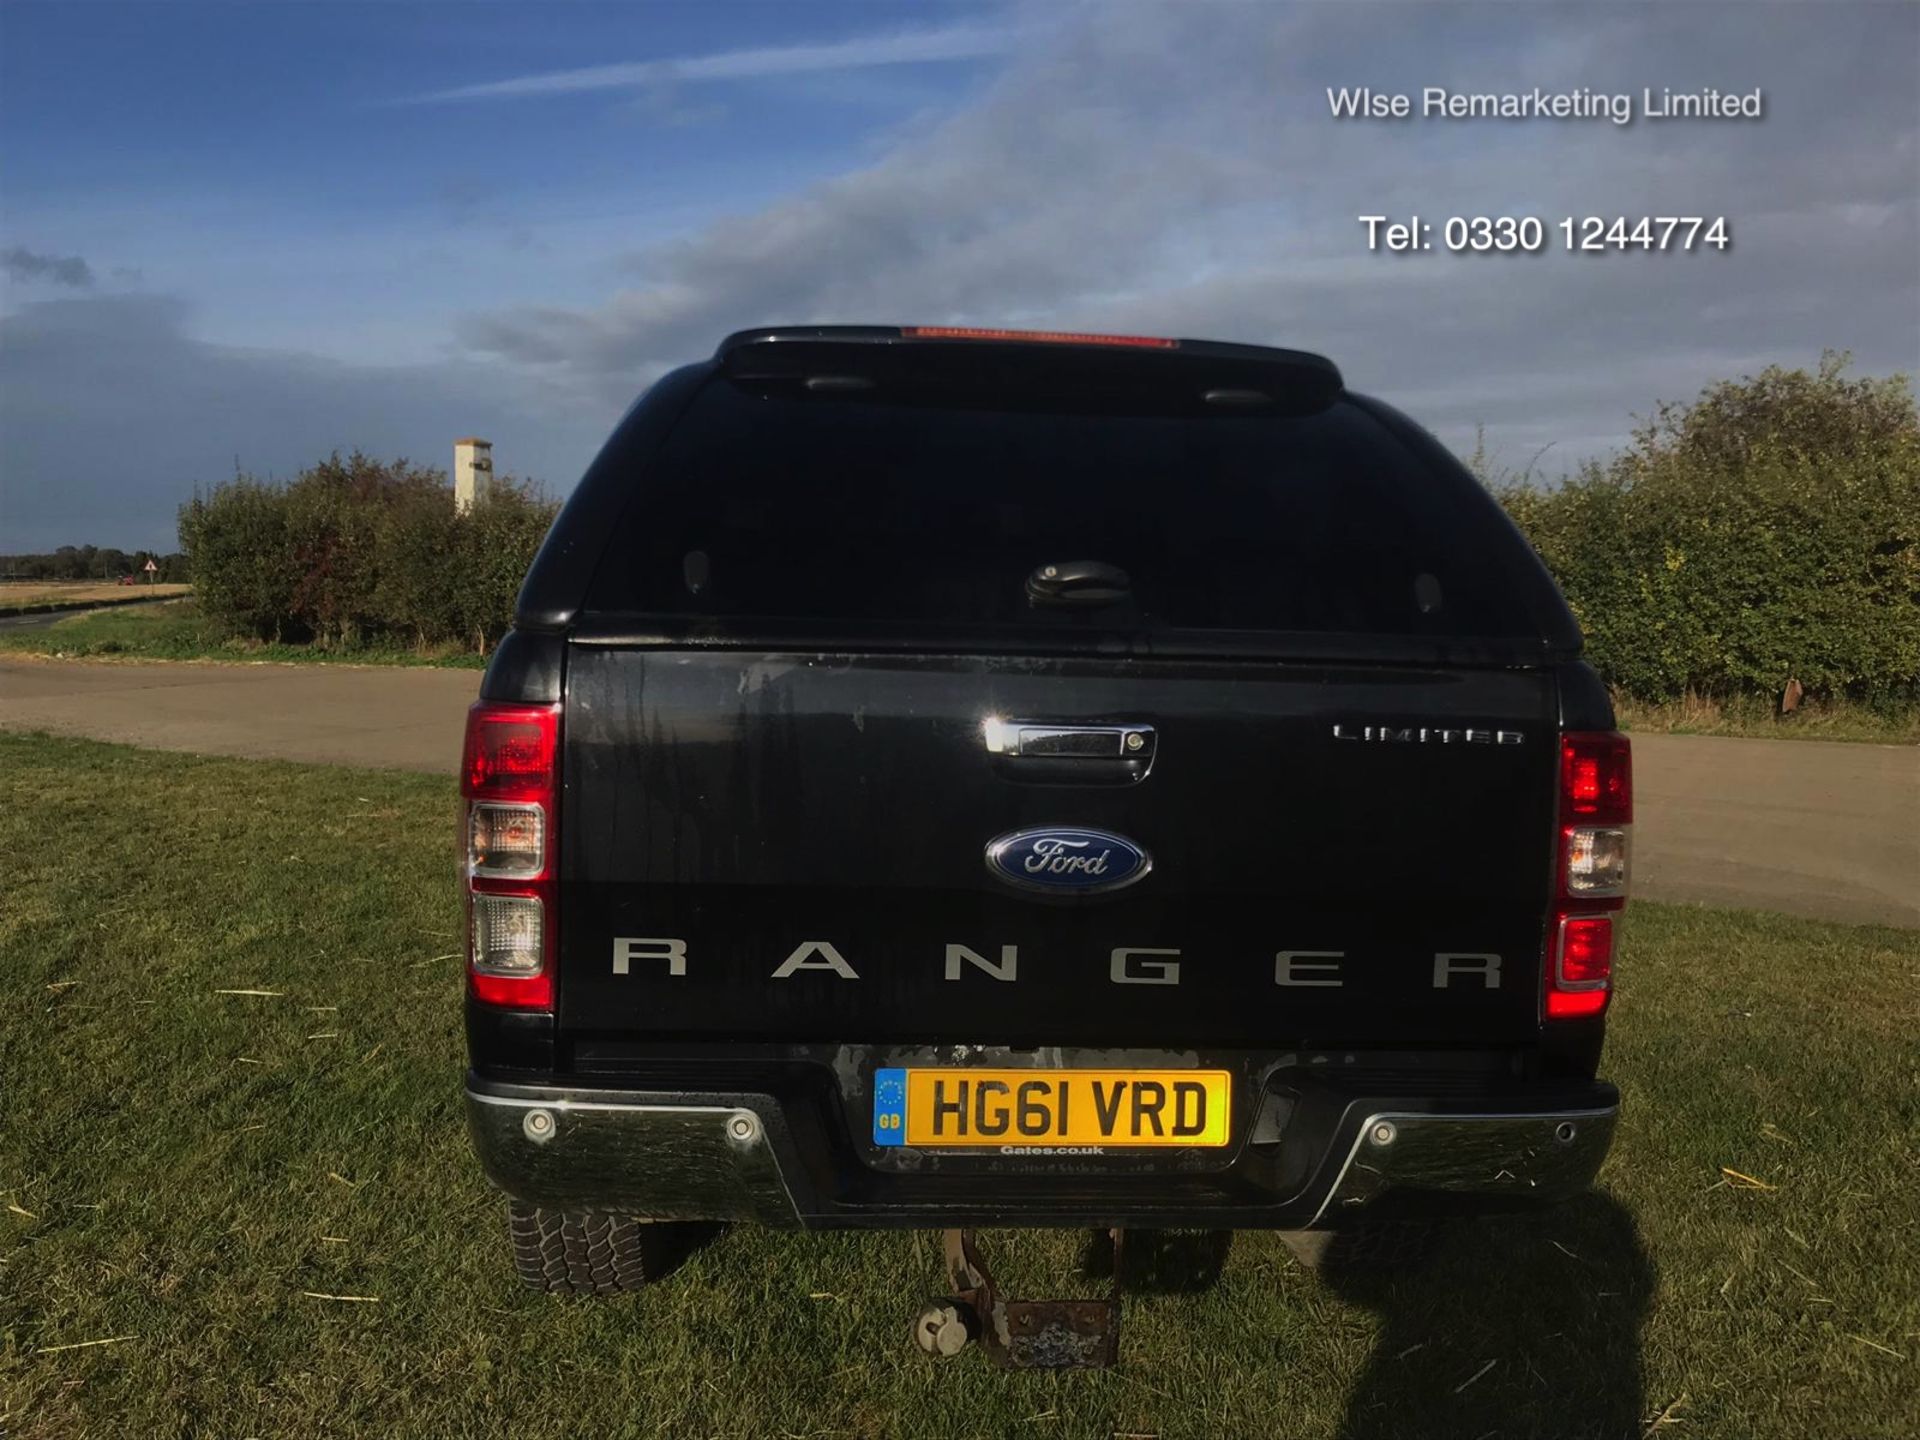 Ford Ranger Limited **3.2L** Tdci (200 BHP) 4x4 - 2012 Model - Black - Double Cab **RARE** - Image 4 of 18